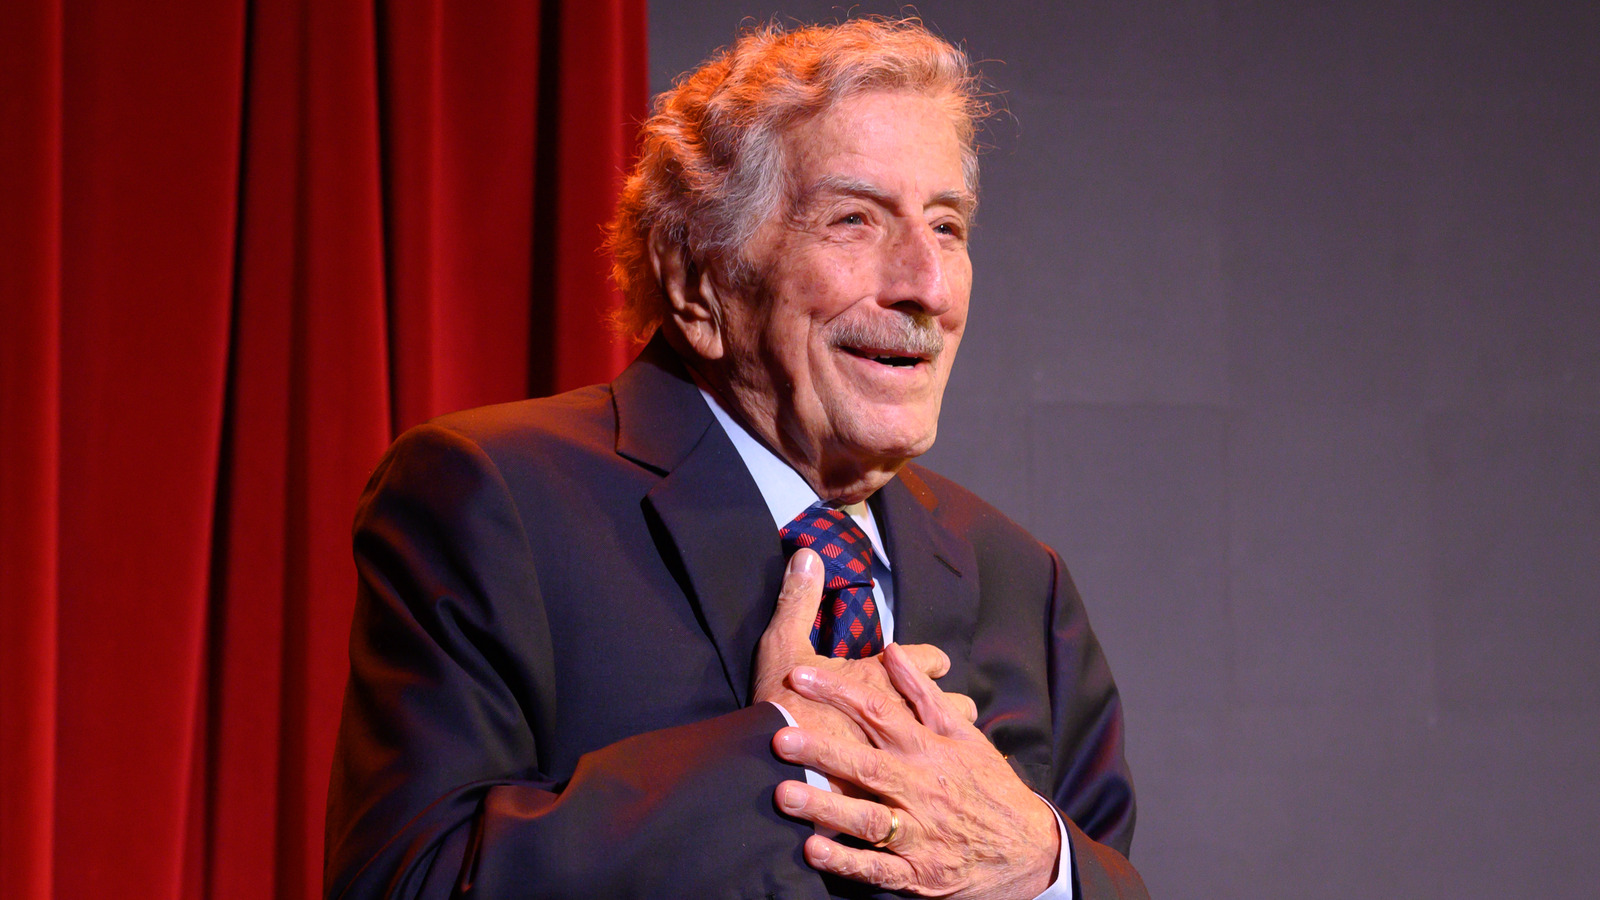 Details About Tony Bennett's Military Career